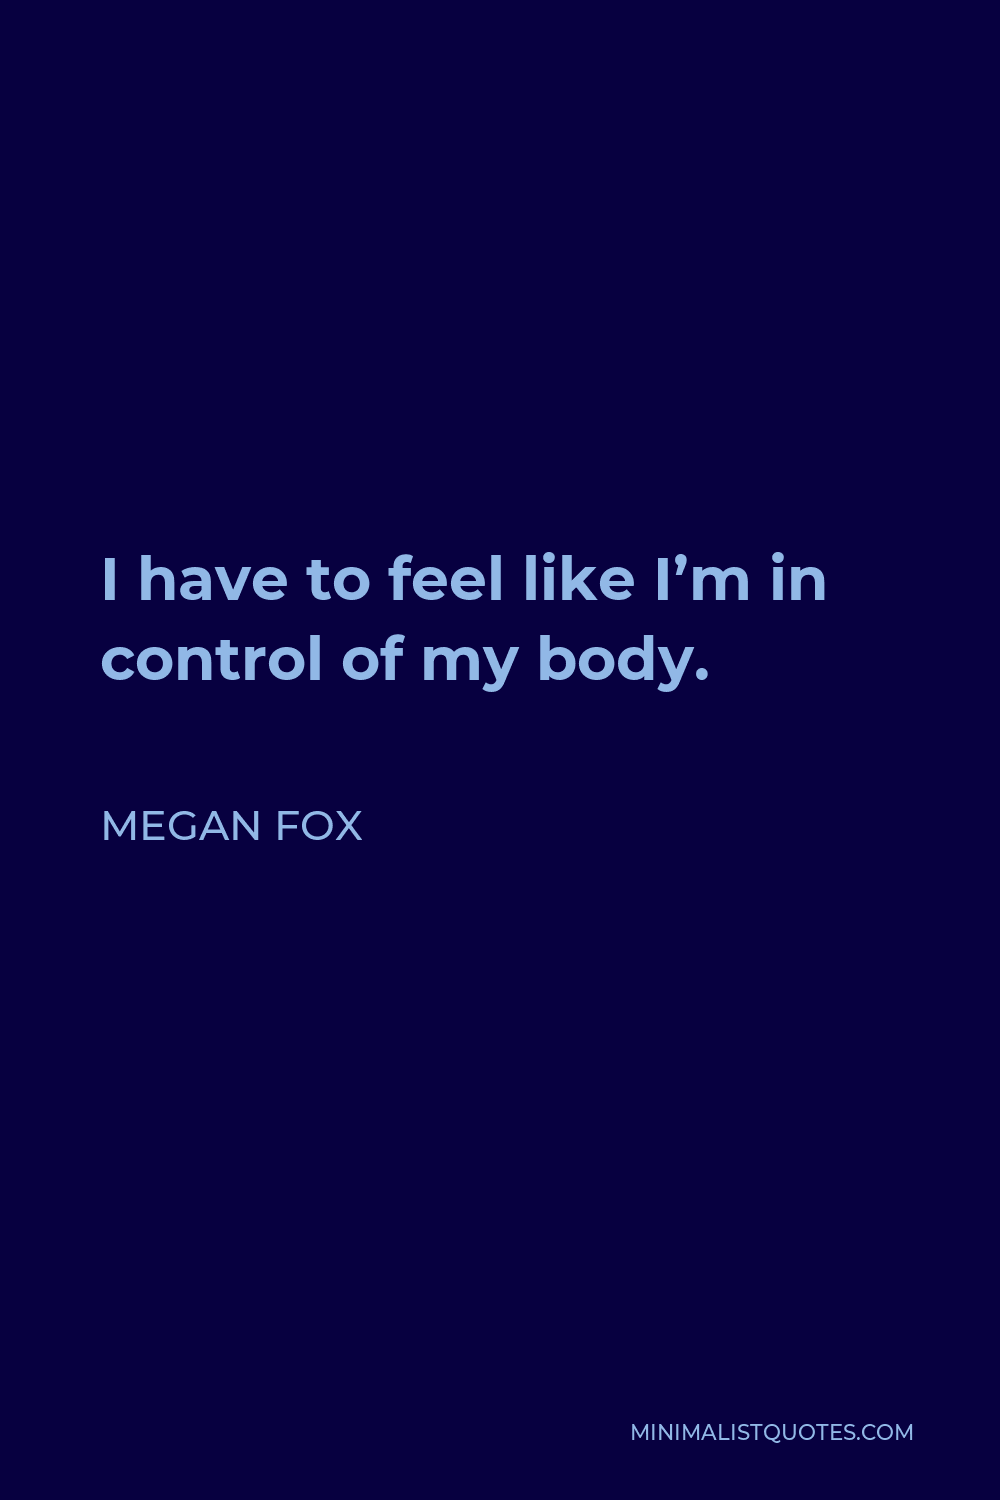 Megan Fox Quote - I have to feel like I’m in control of my body.